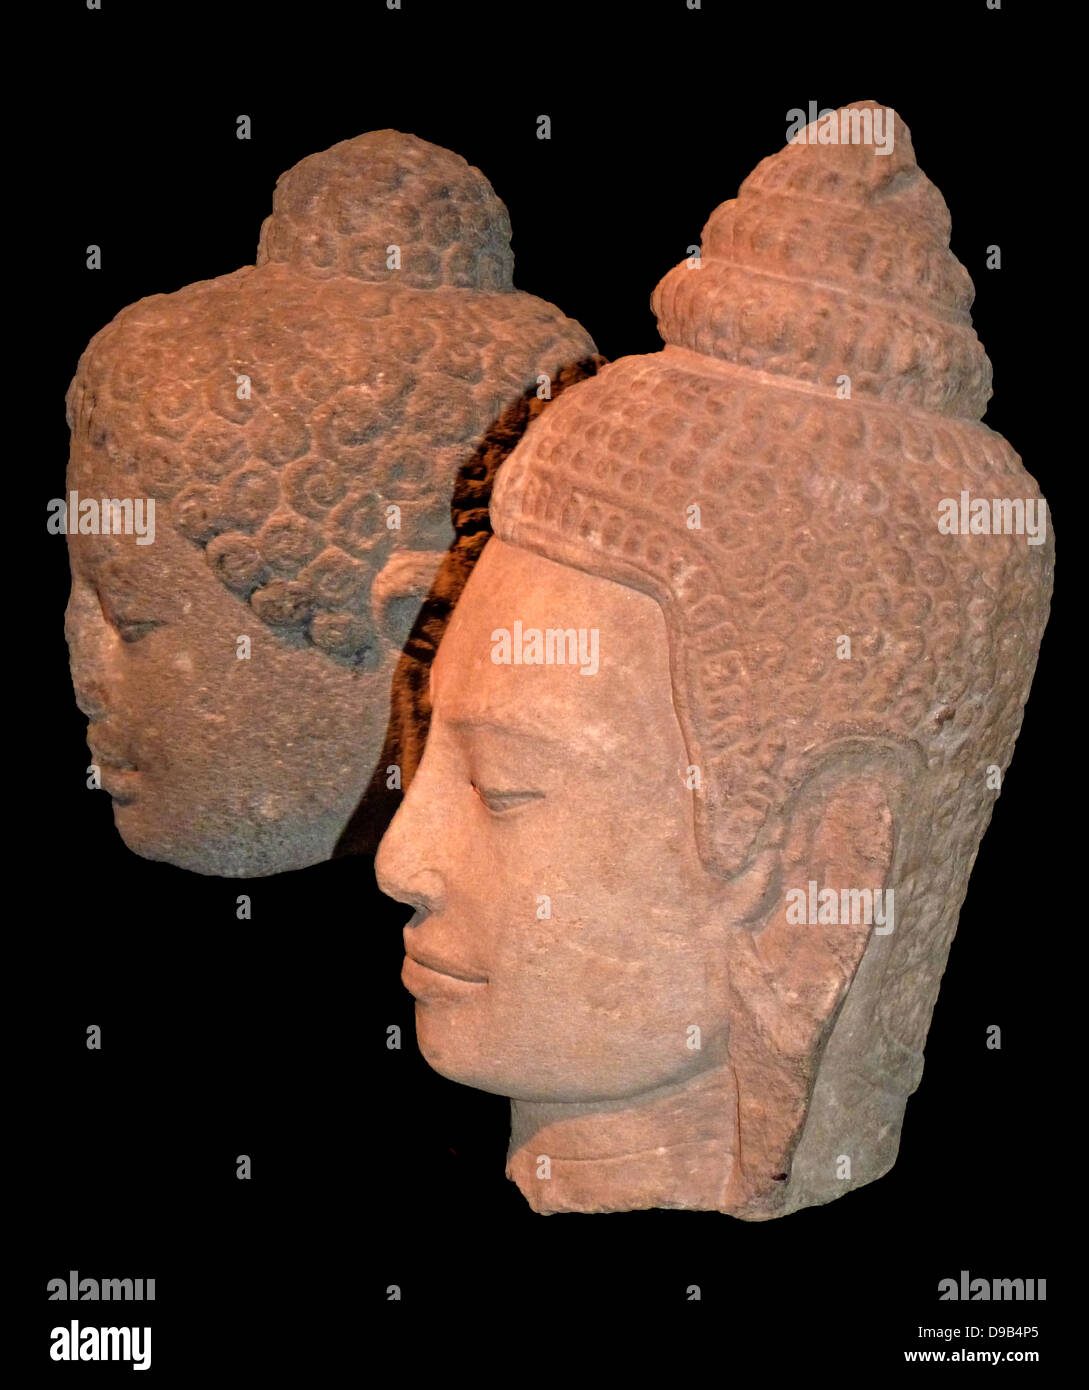 Head of the Buddha. 800-30, Shailendra dynasty, Central Java, Stone.  The head originally formed part of a large-scale image of Buddha Shakyamuni. The Shailendra rulers were strong supporters of Mahayana Buddhism and erected many Buddhist monuments in cen Stock Photo